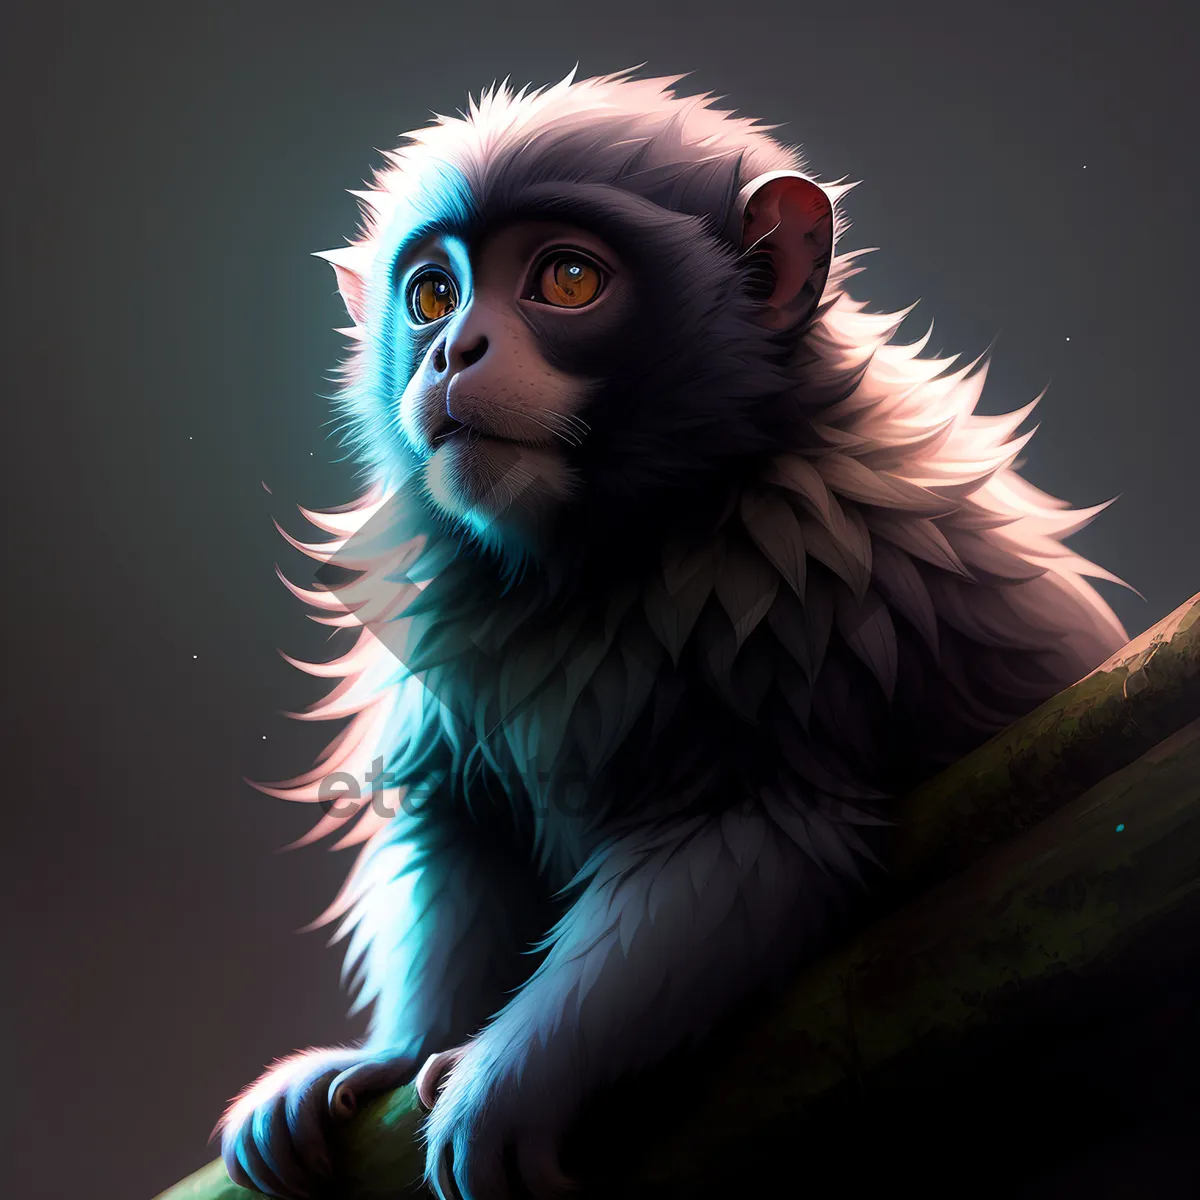 Picture of Wild Primate with Piercing Eyes